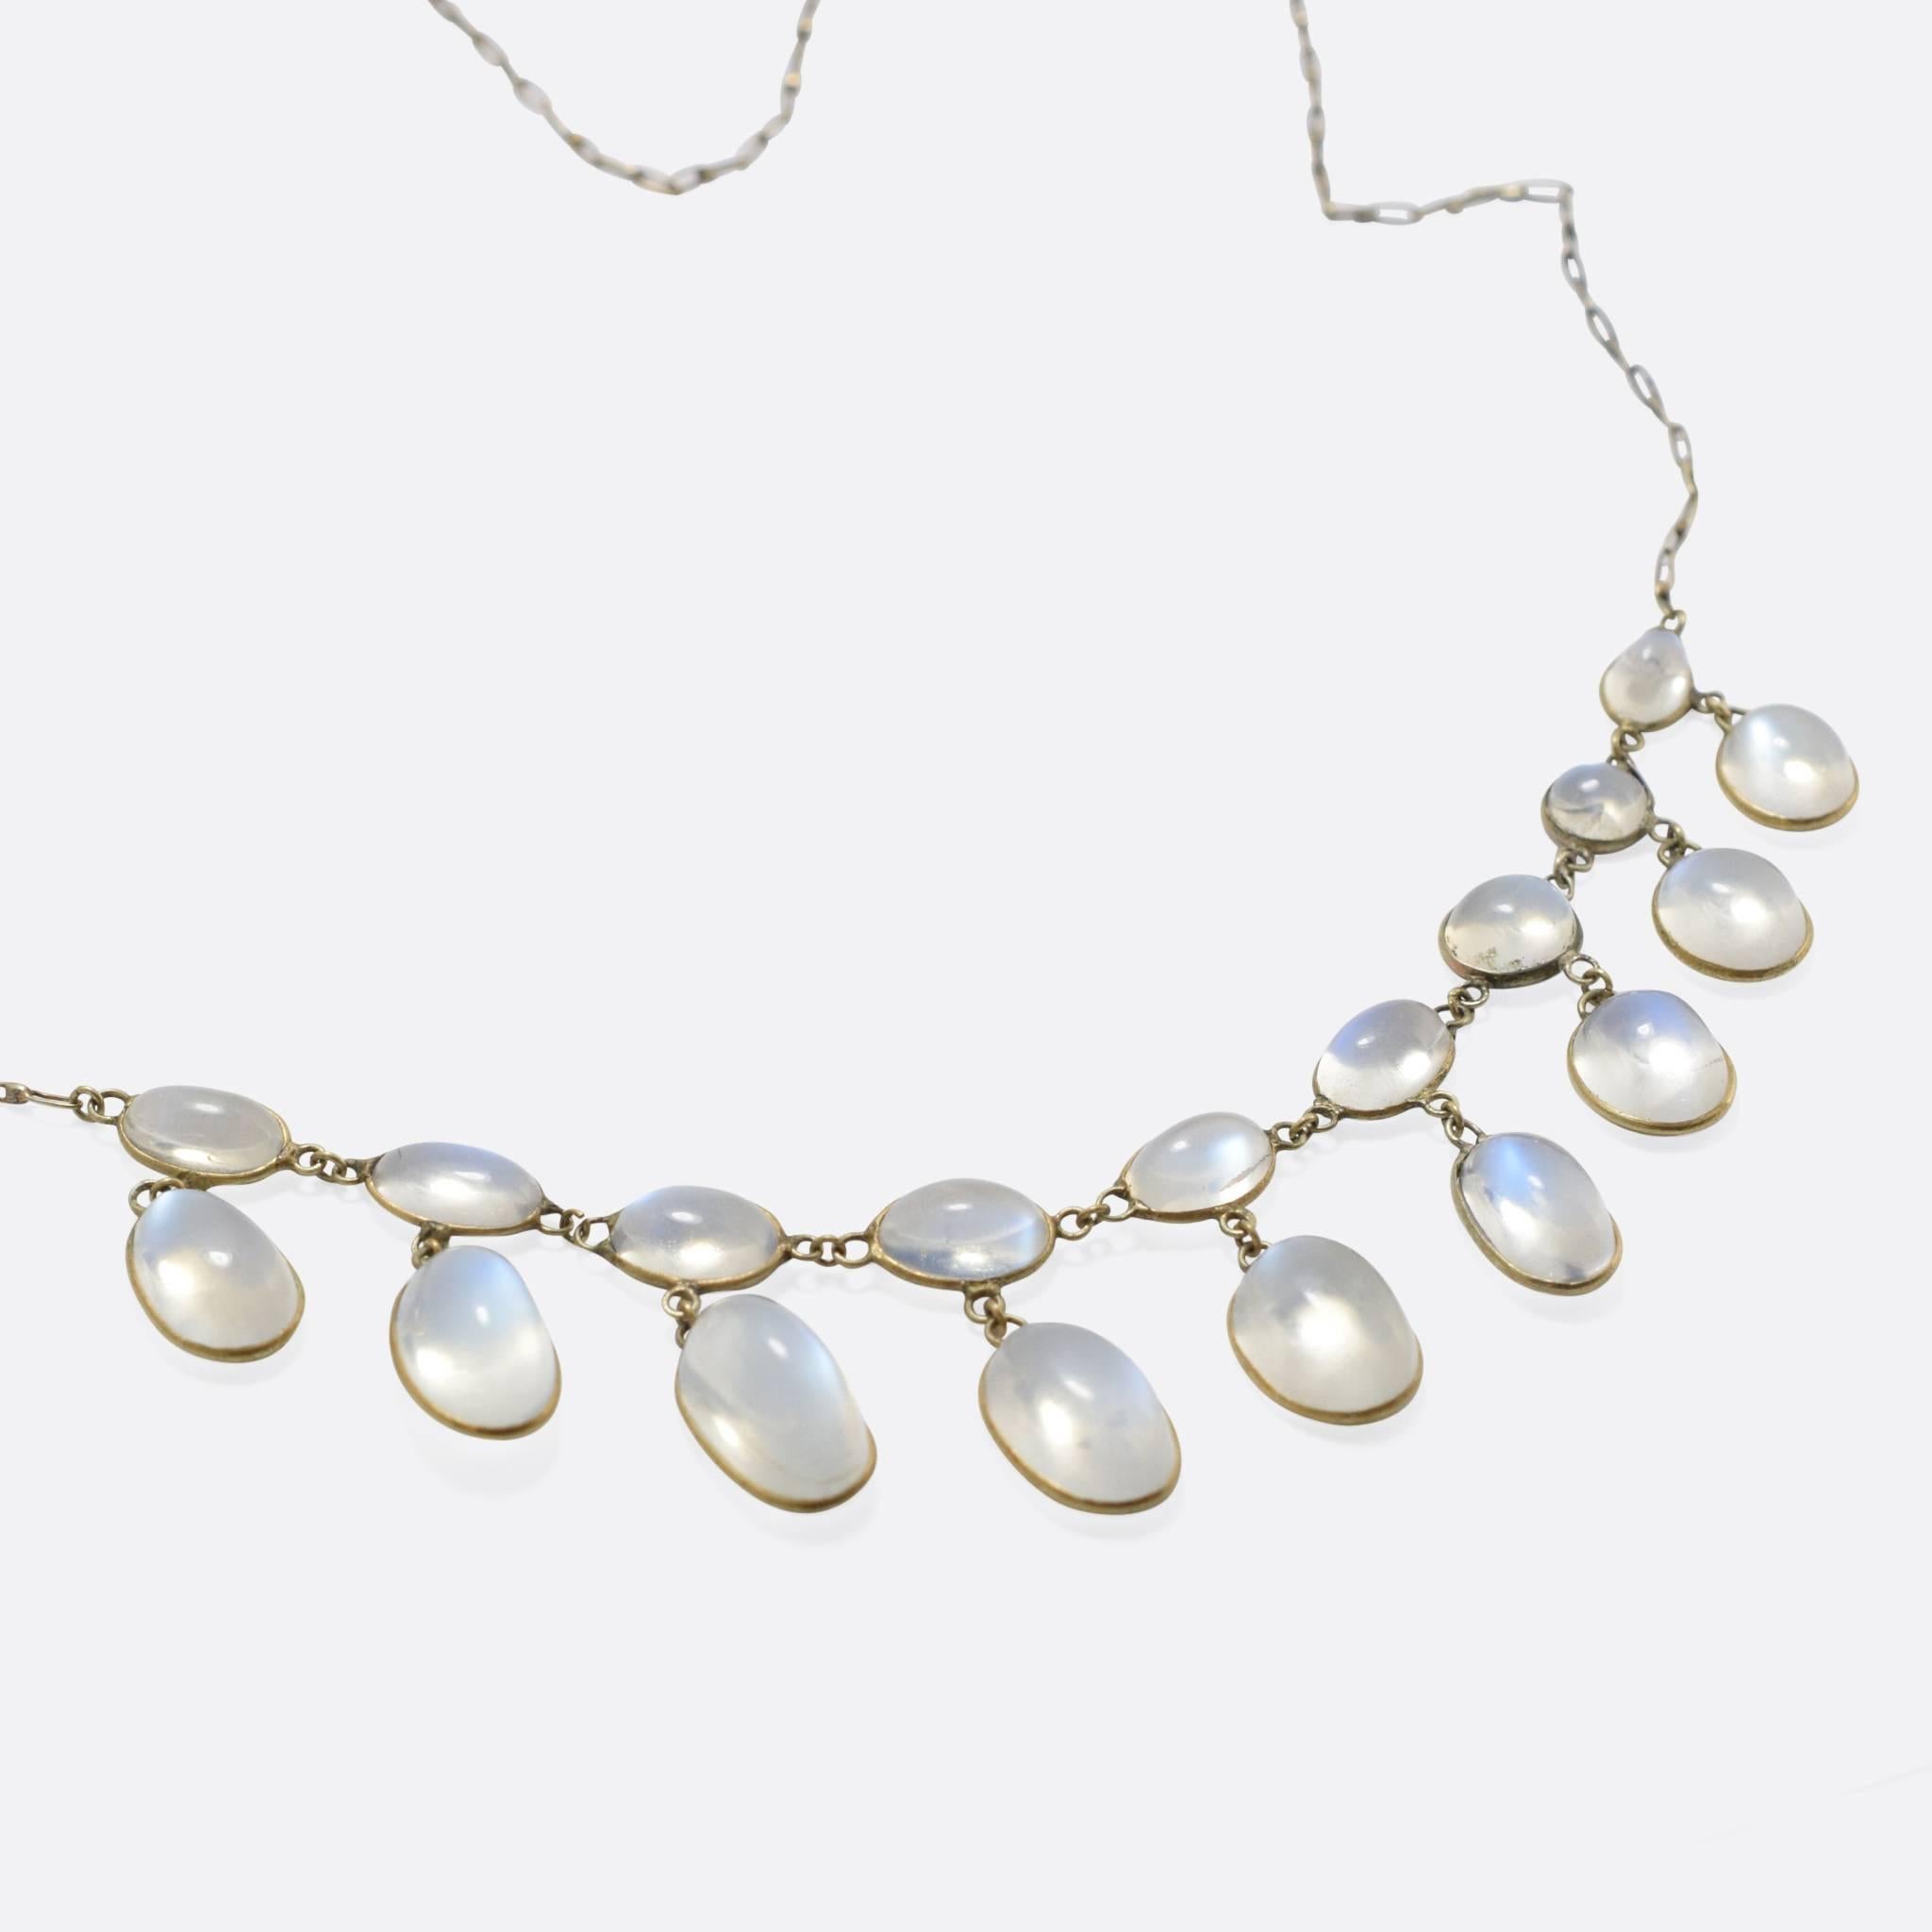 A magical blue moonstone festoon necklace, set with 18 individual cabochon stones in two tiers. The moonstones display excellent adularescence - the effect whereby they appear to glow brightly from within - and rest in 15k gold mounts on a long 21